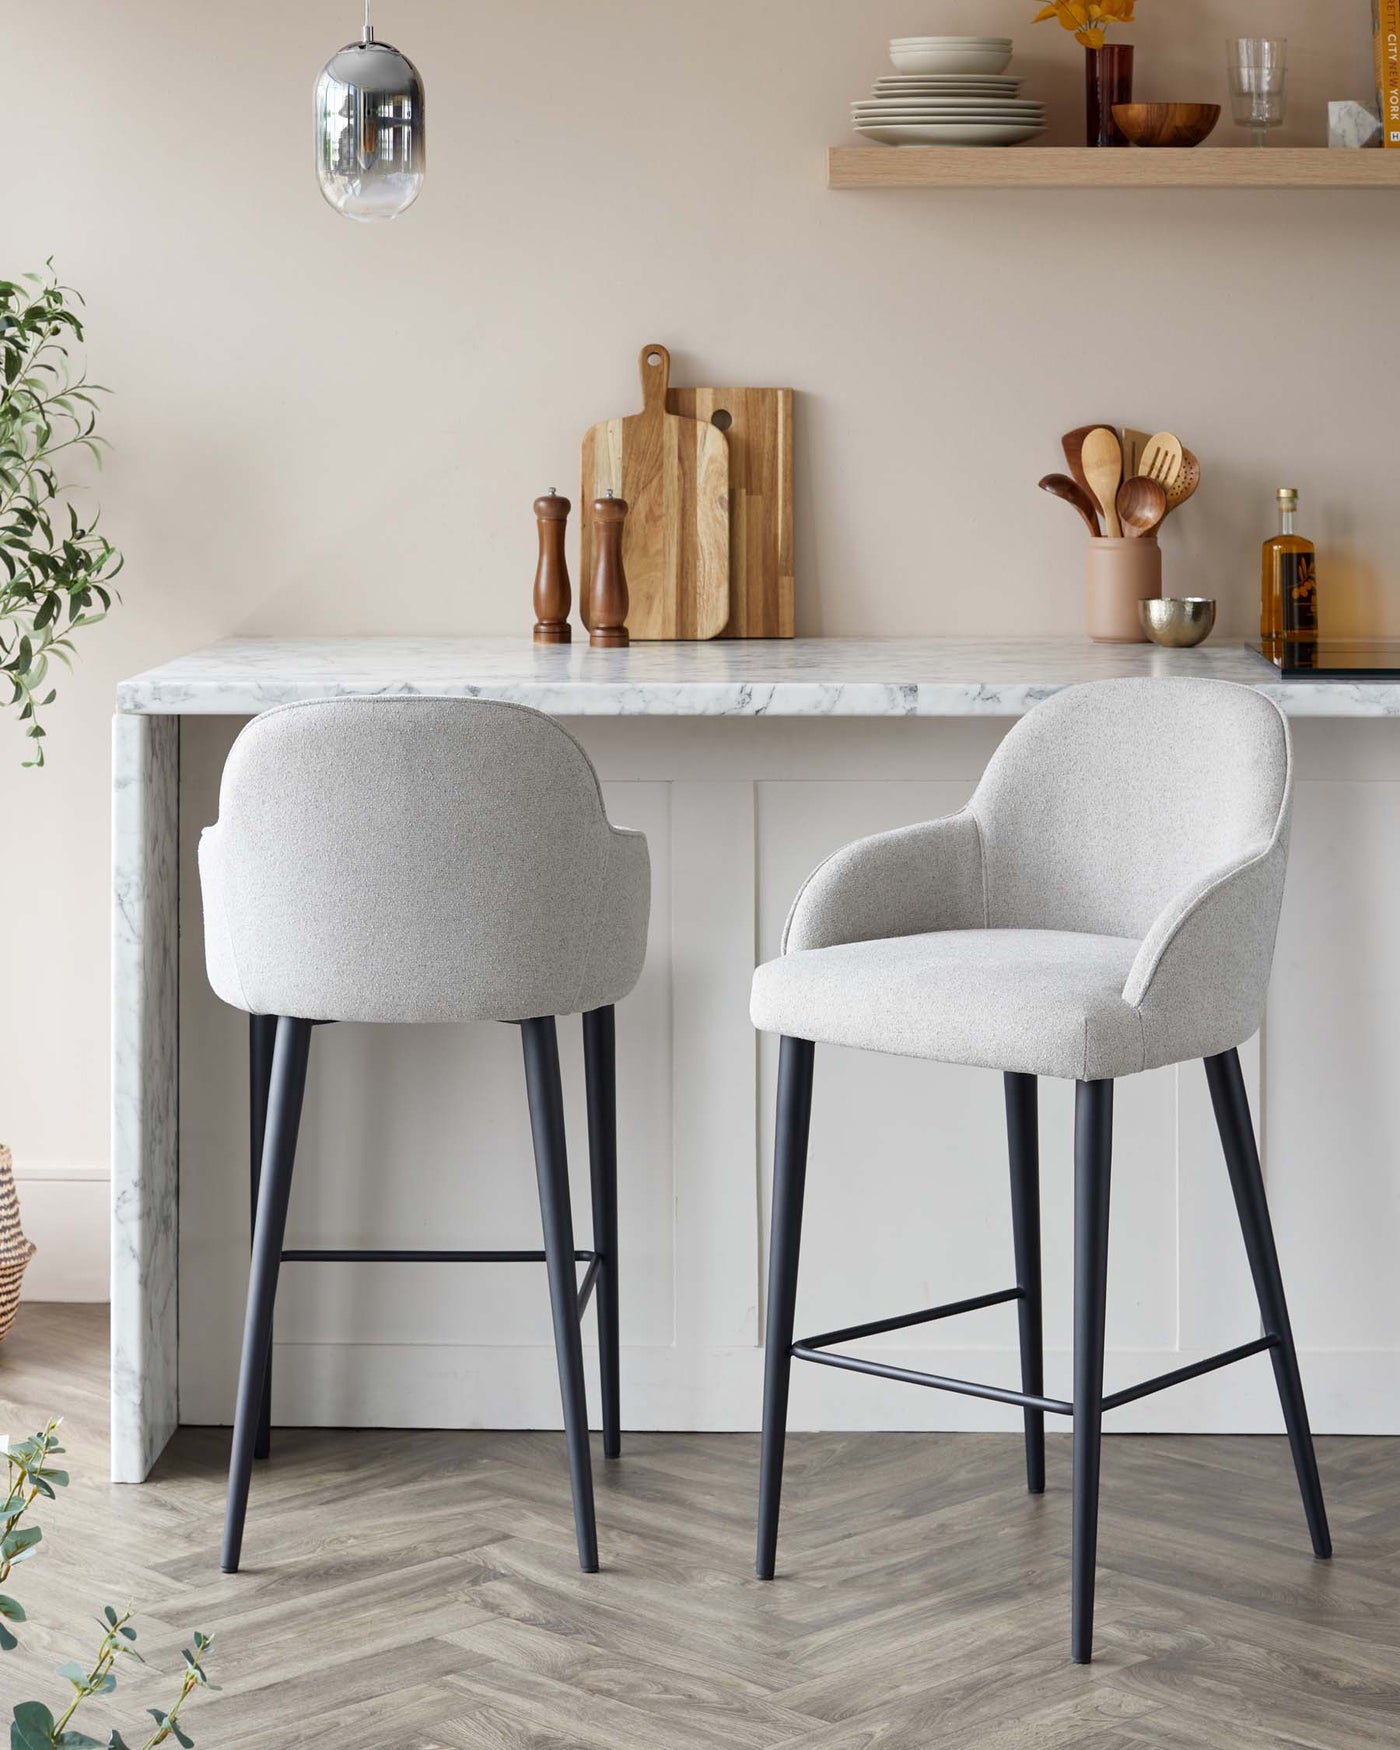 Two modern upholstered bar stools with sleek grey fabric and black metal legs are positioned at a white marble countertop. The stools feature curved backrests and integrated footrests for comfort and style.